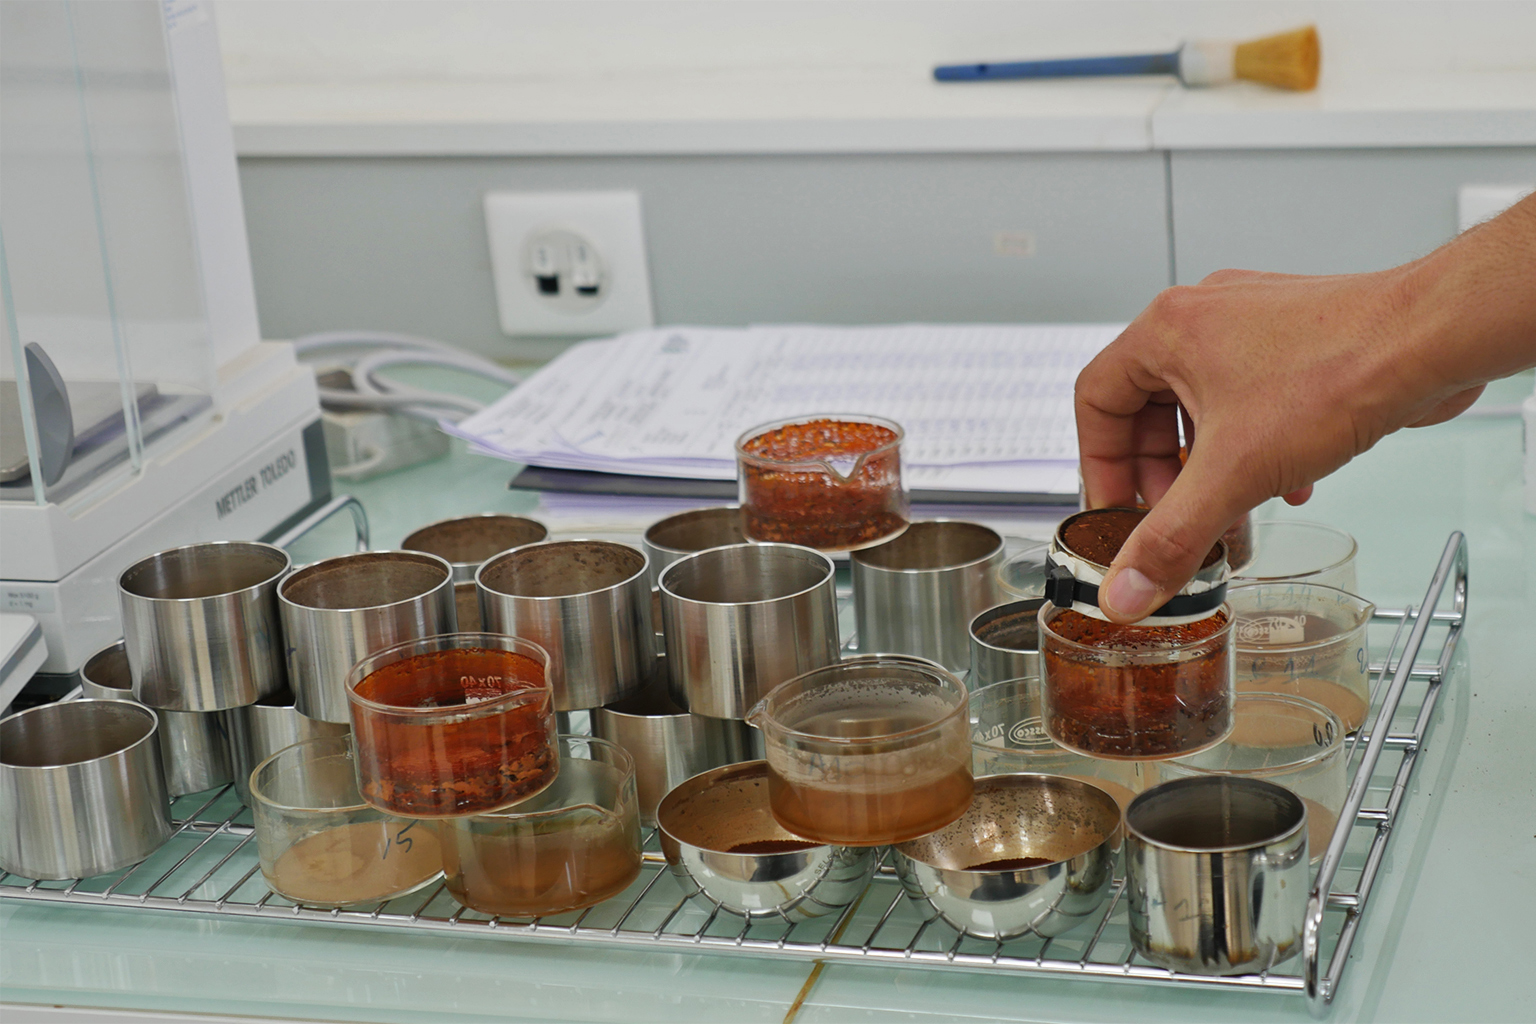 These soil samples are tested for their water content and how dense, or compact, the soil is.